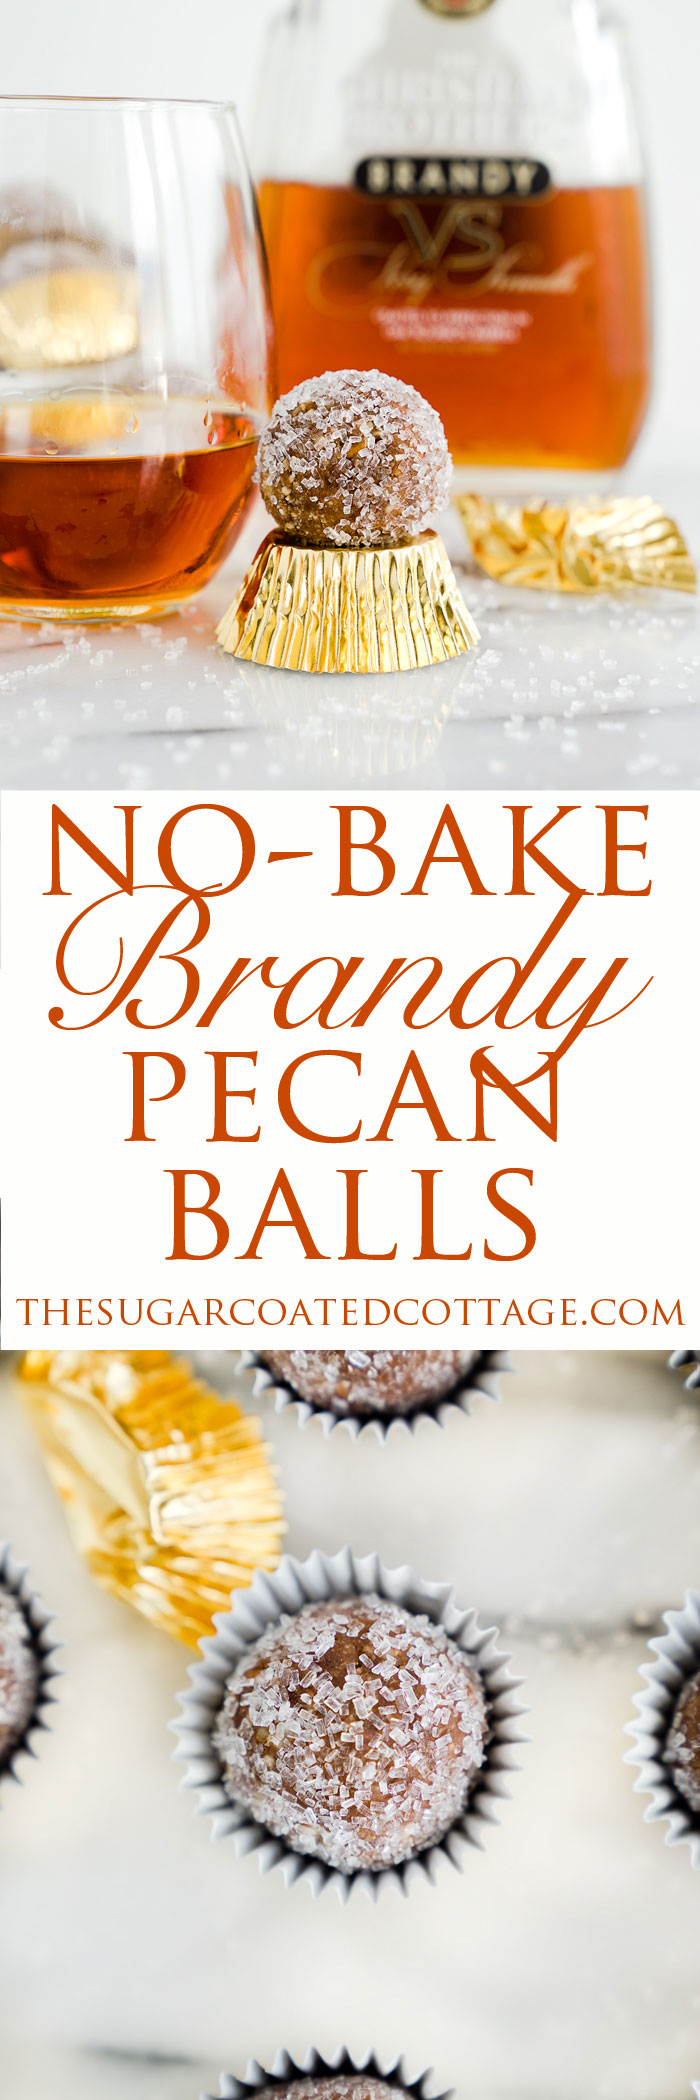 Brandy Pecan Ball Recipe. Need an awesome cookie to take to your next holiday gathering or maybe a cookie to snack on as the snow falls and you cuddle by the fireplace? Brandy Pecan Balls are the answer. | thesugarcoatedcottage.com